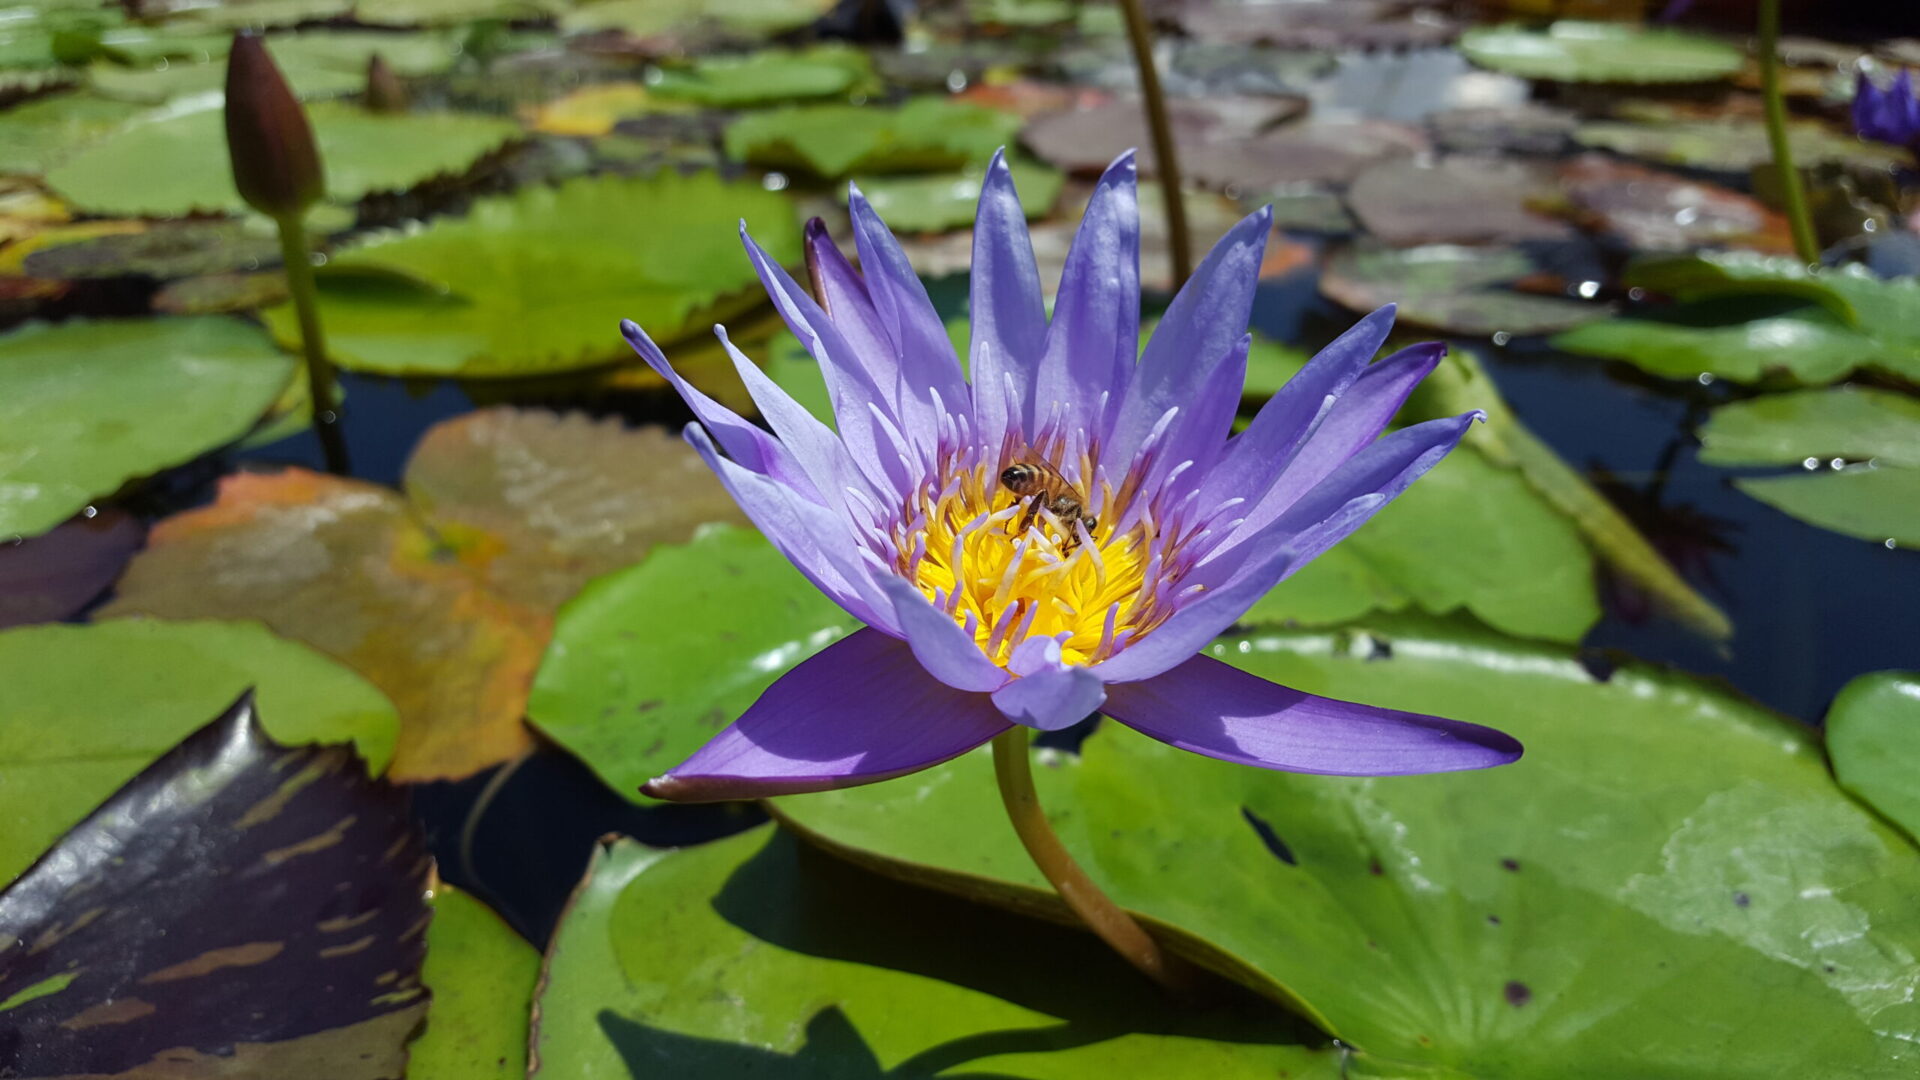 A purple flower with yellow body with green leaves